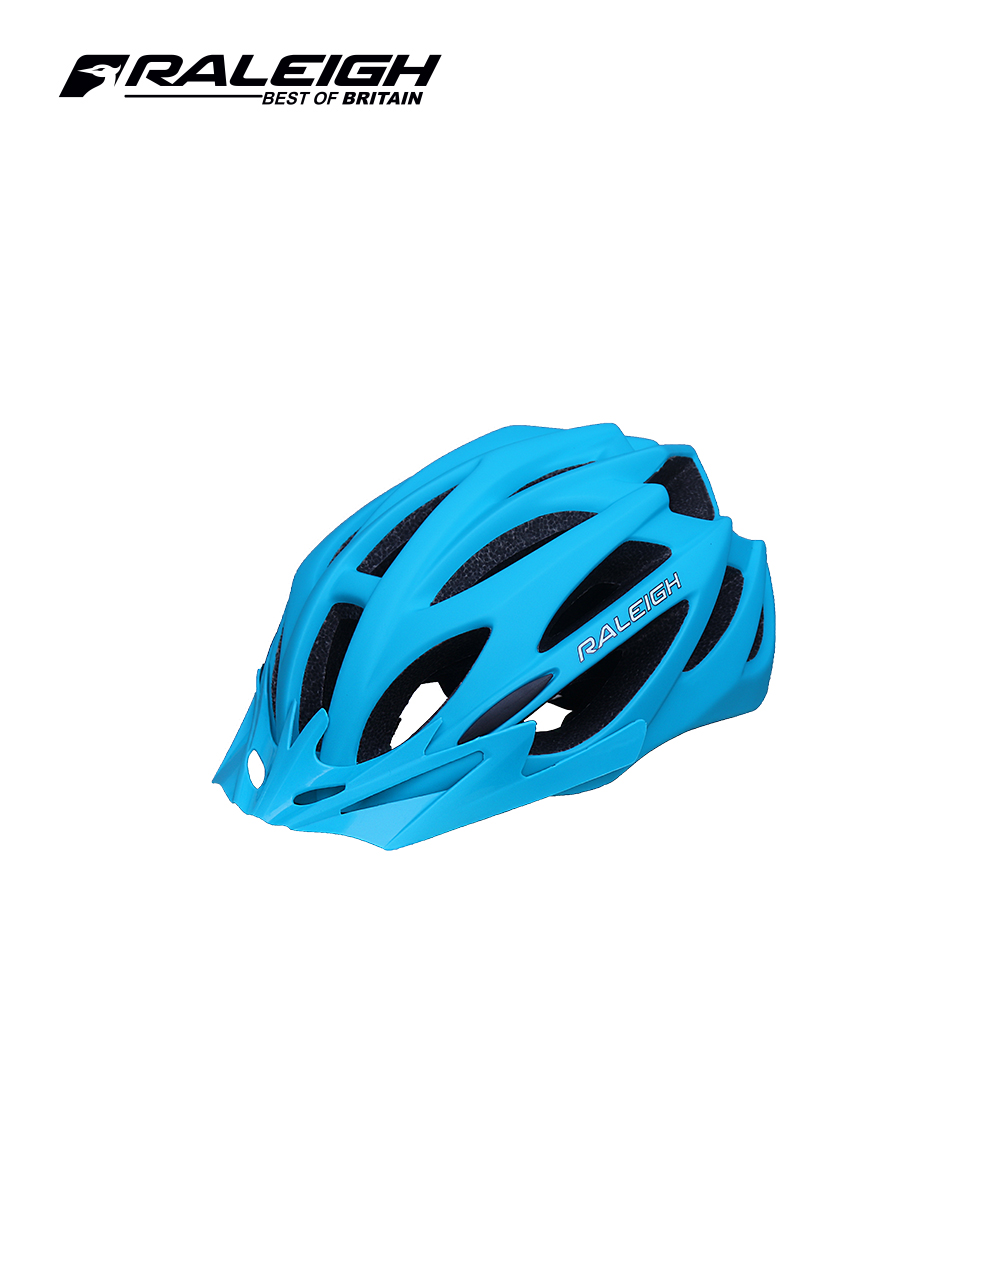 Buy Online Raleigh Bike Parts Bicycle Accessories Shop Buy Cycle Spares in India.